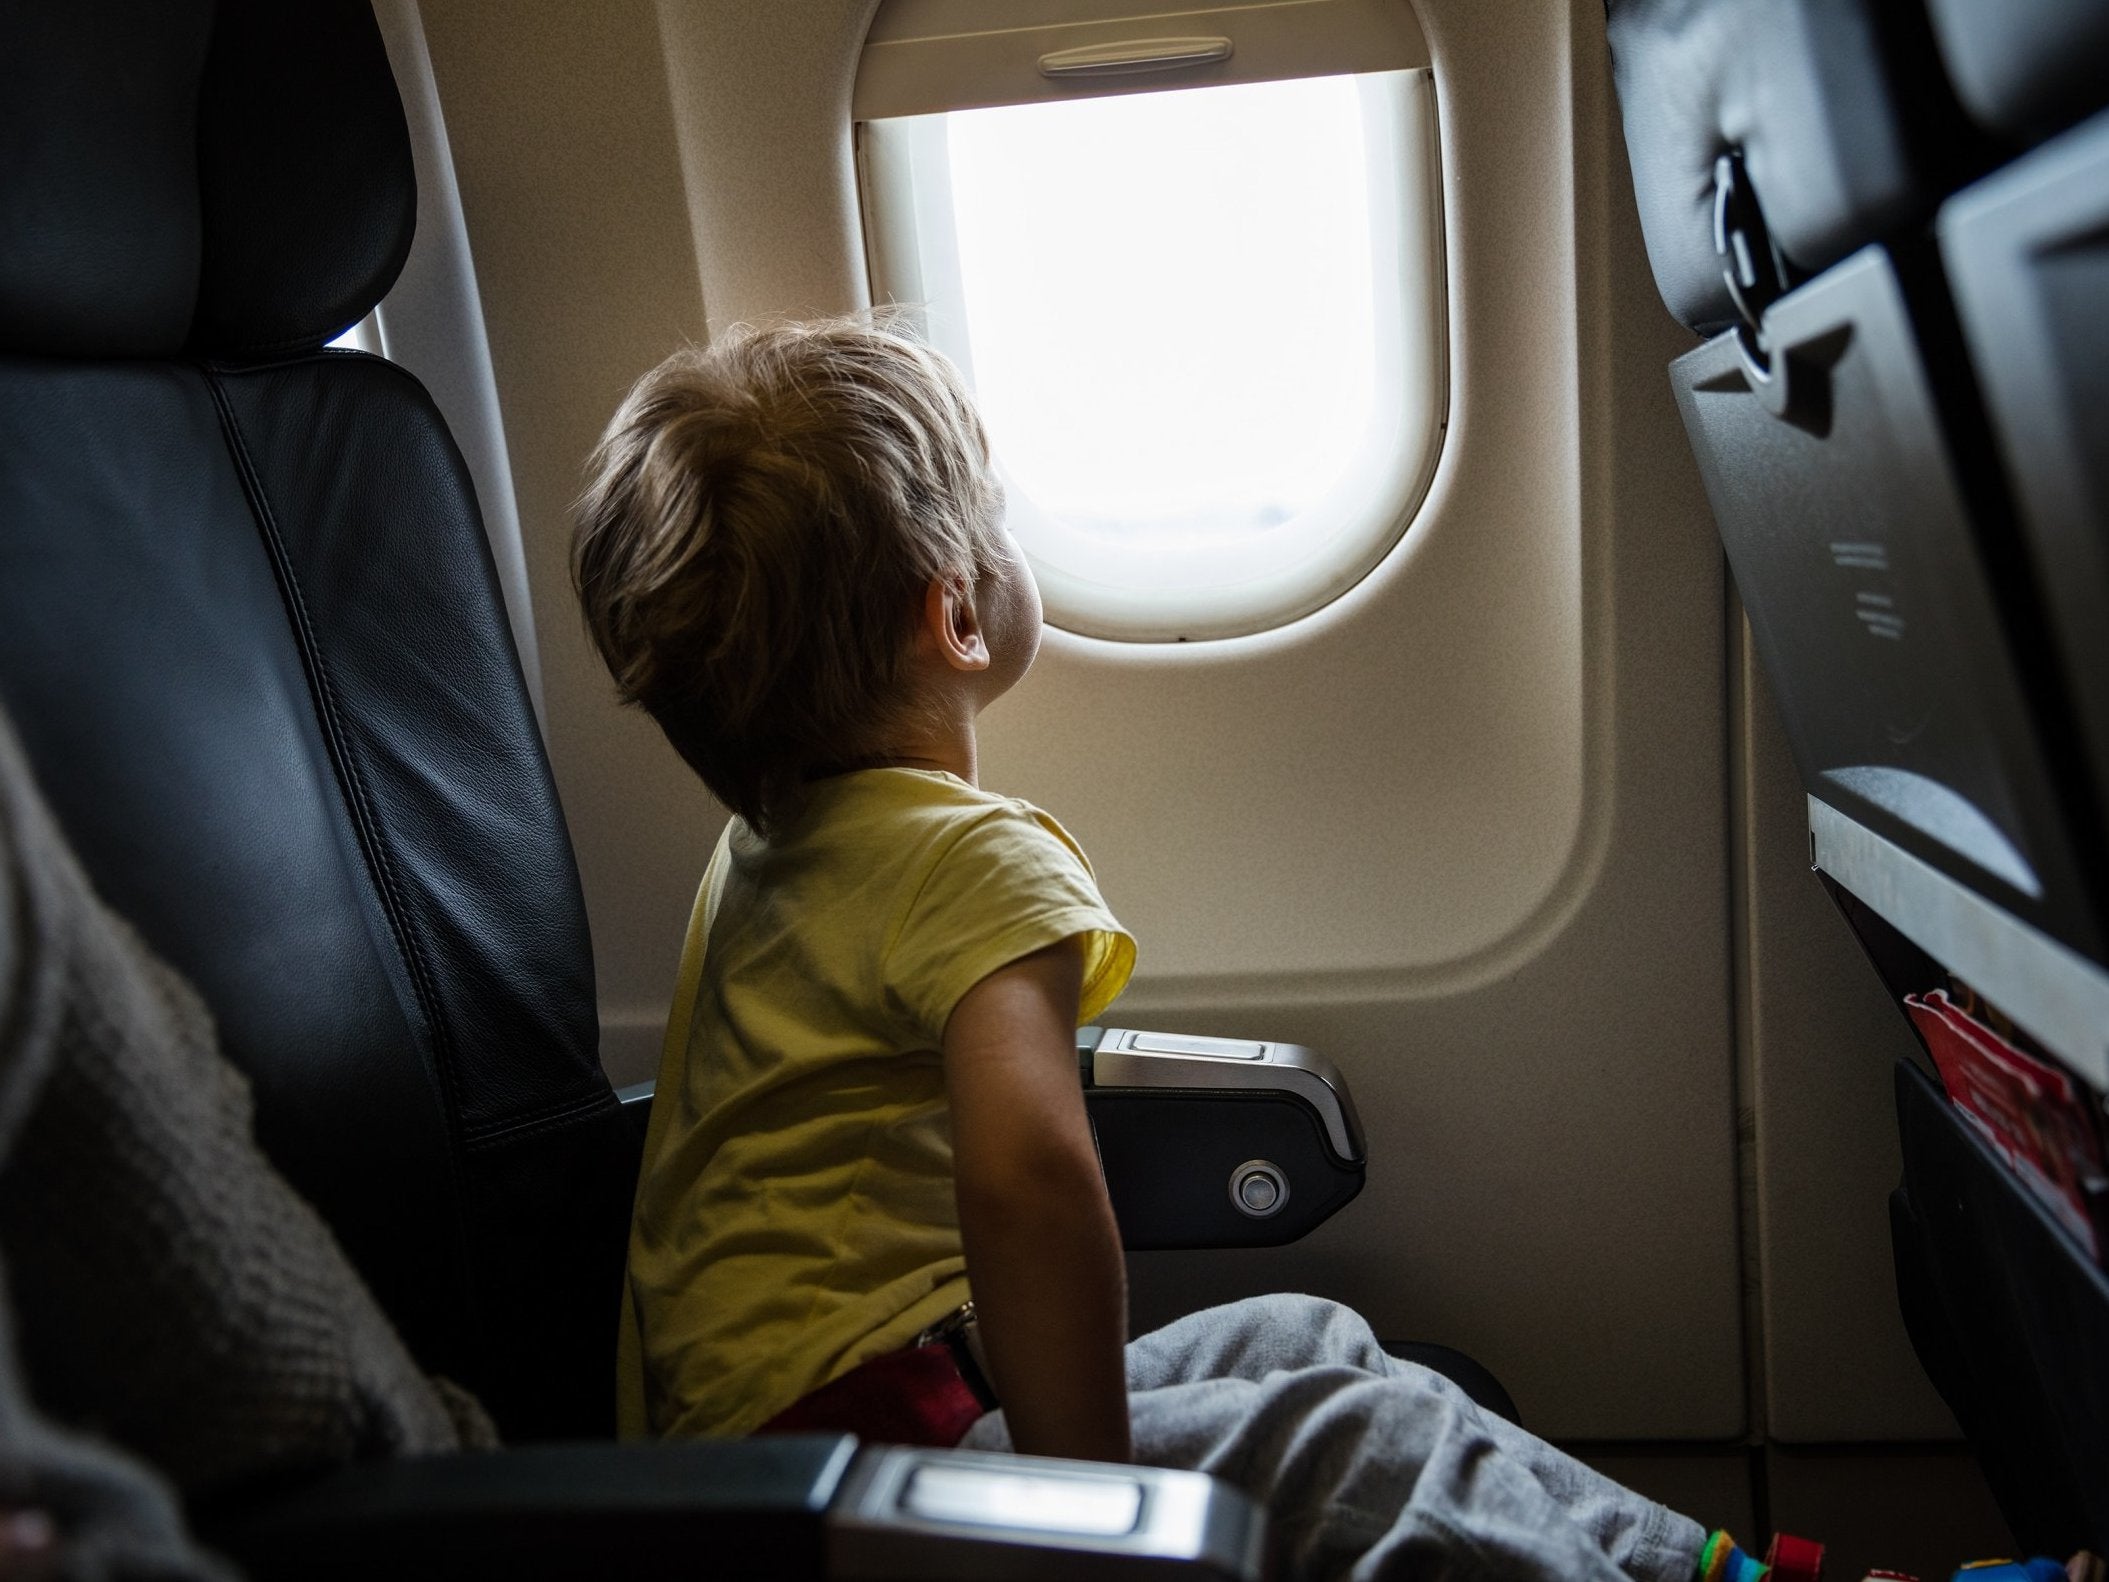 Other passengers may switch to allow parents and children to sit together